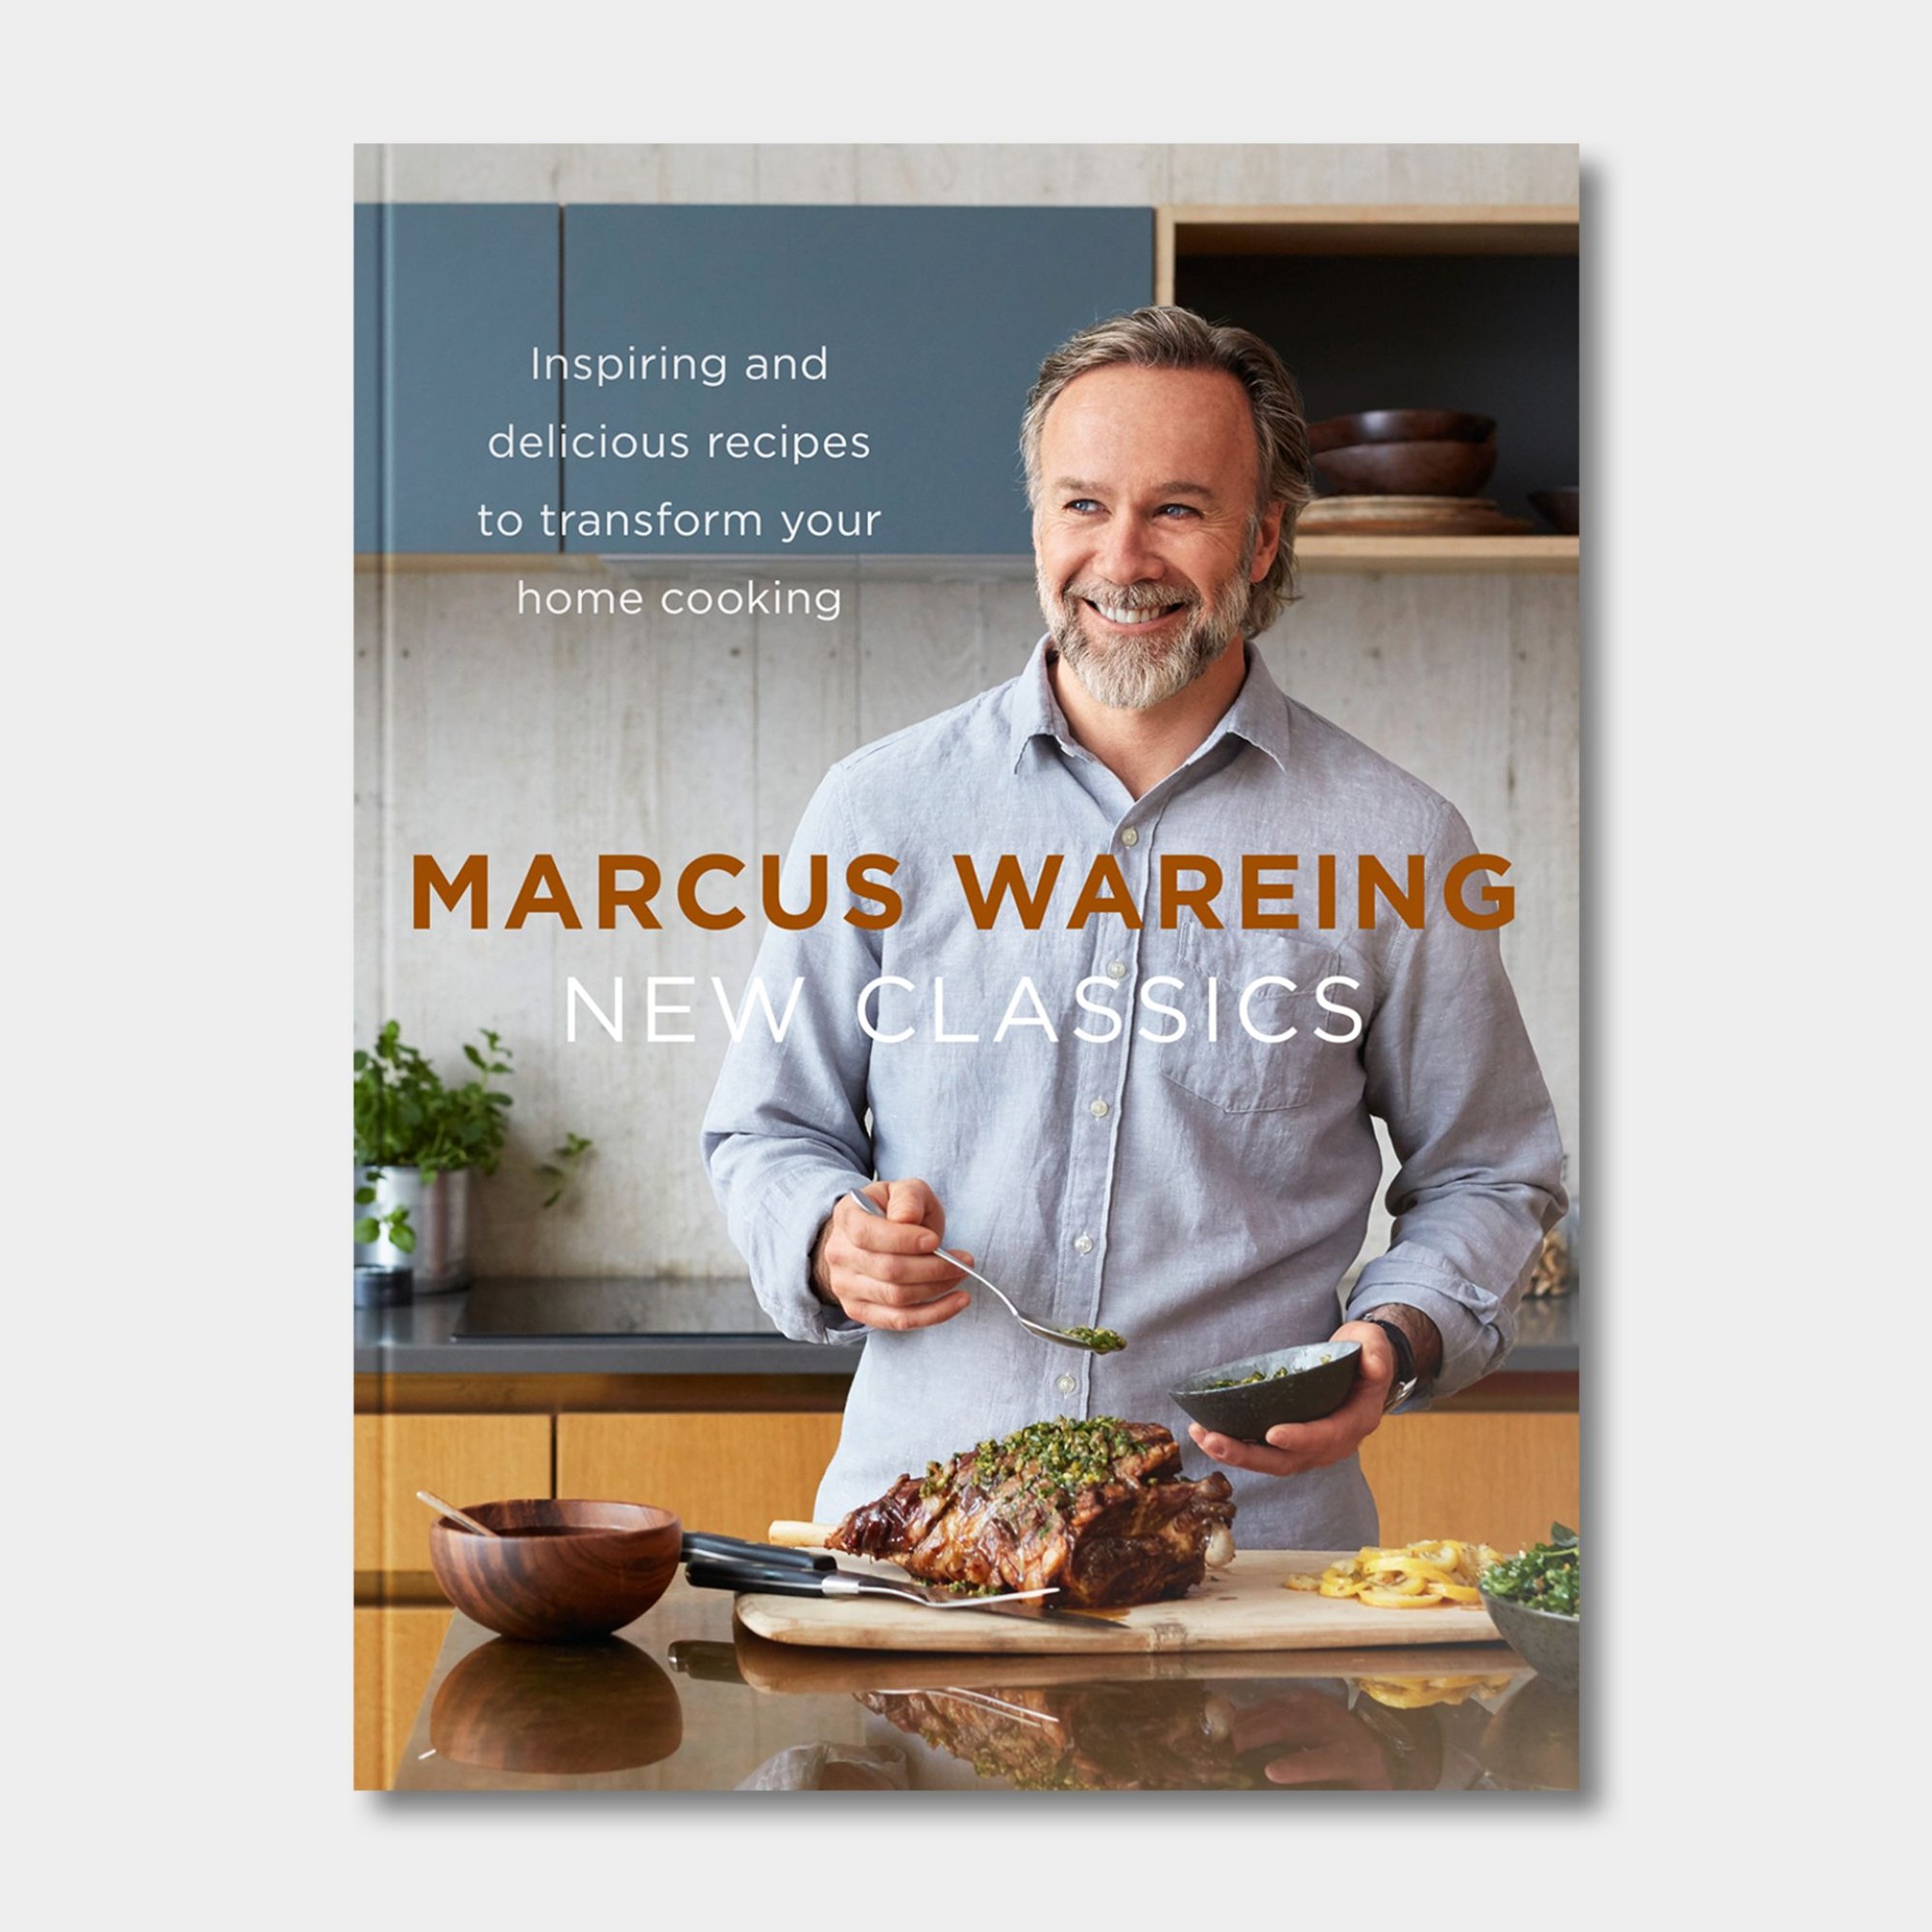 New Classics cookbook by Marcus Wareing